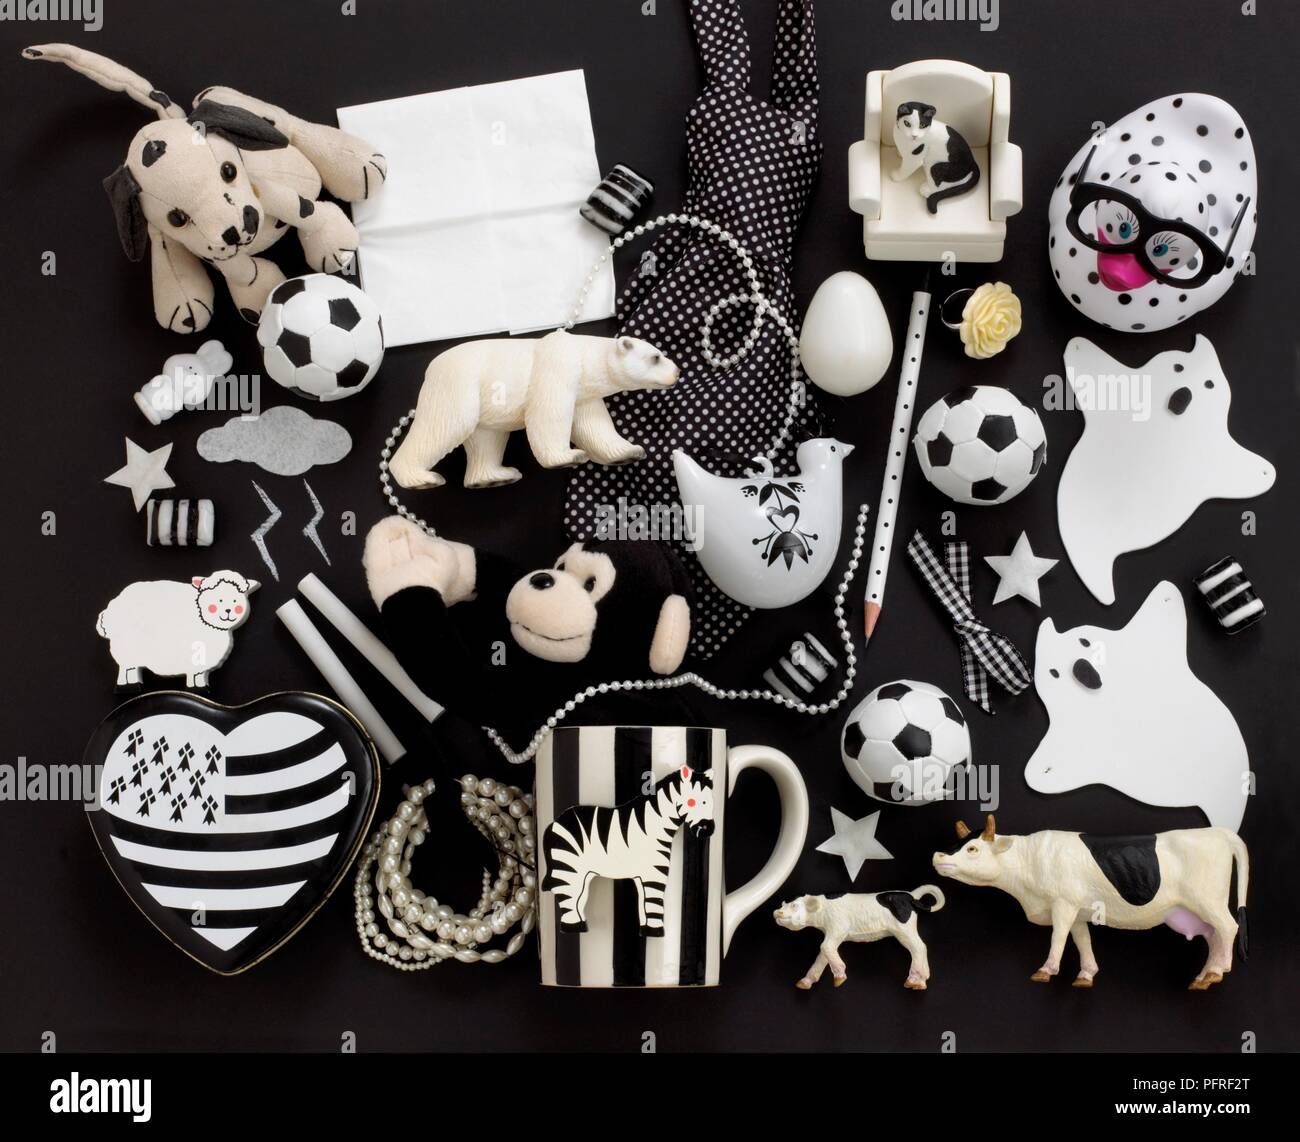 Small black and white toys on black background Stock Photo